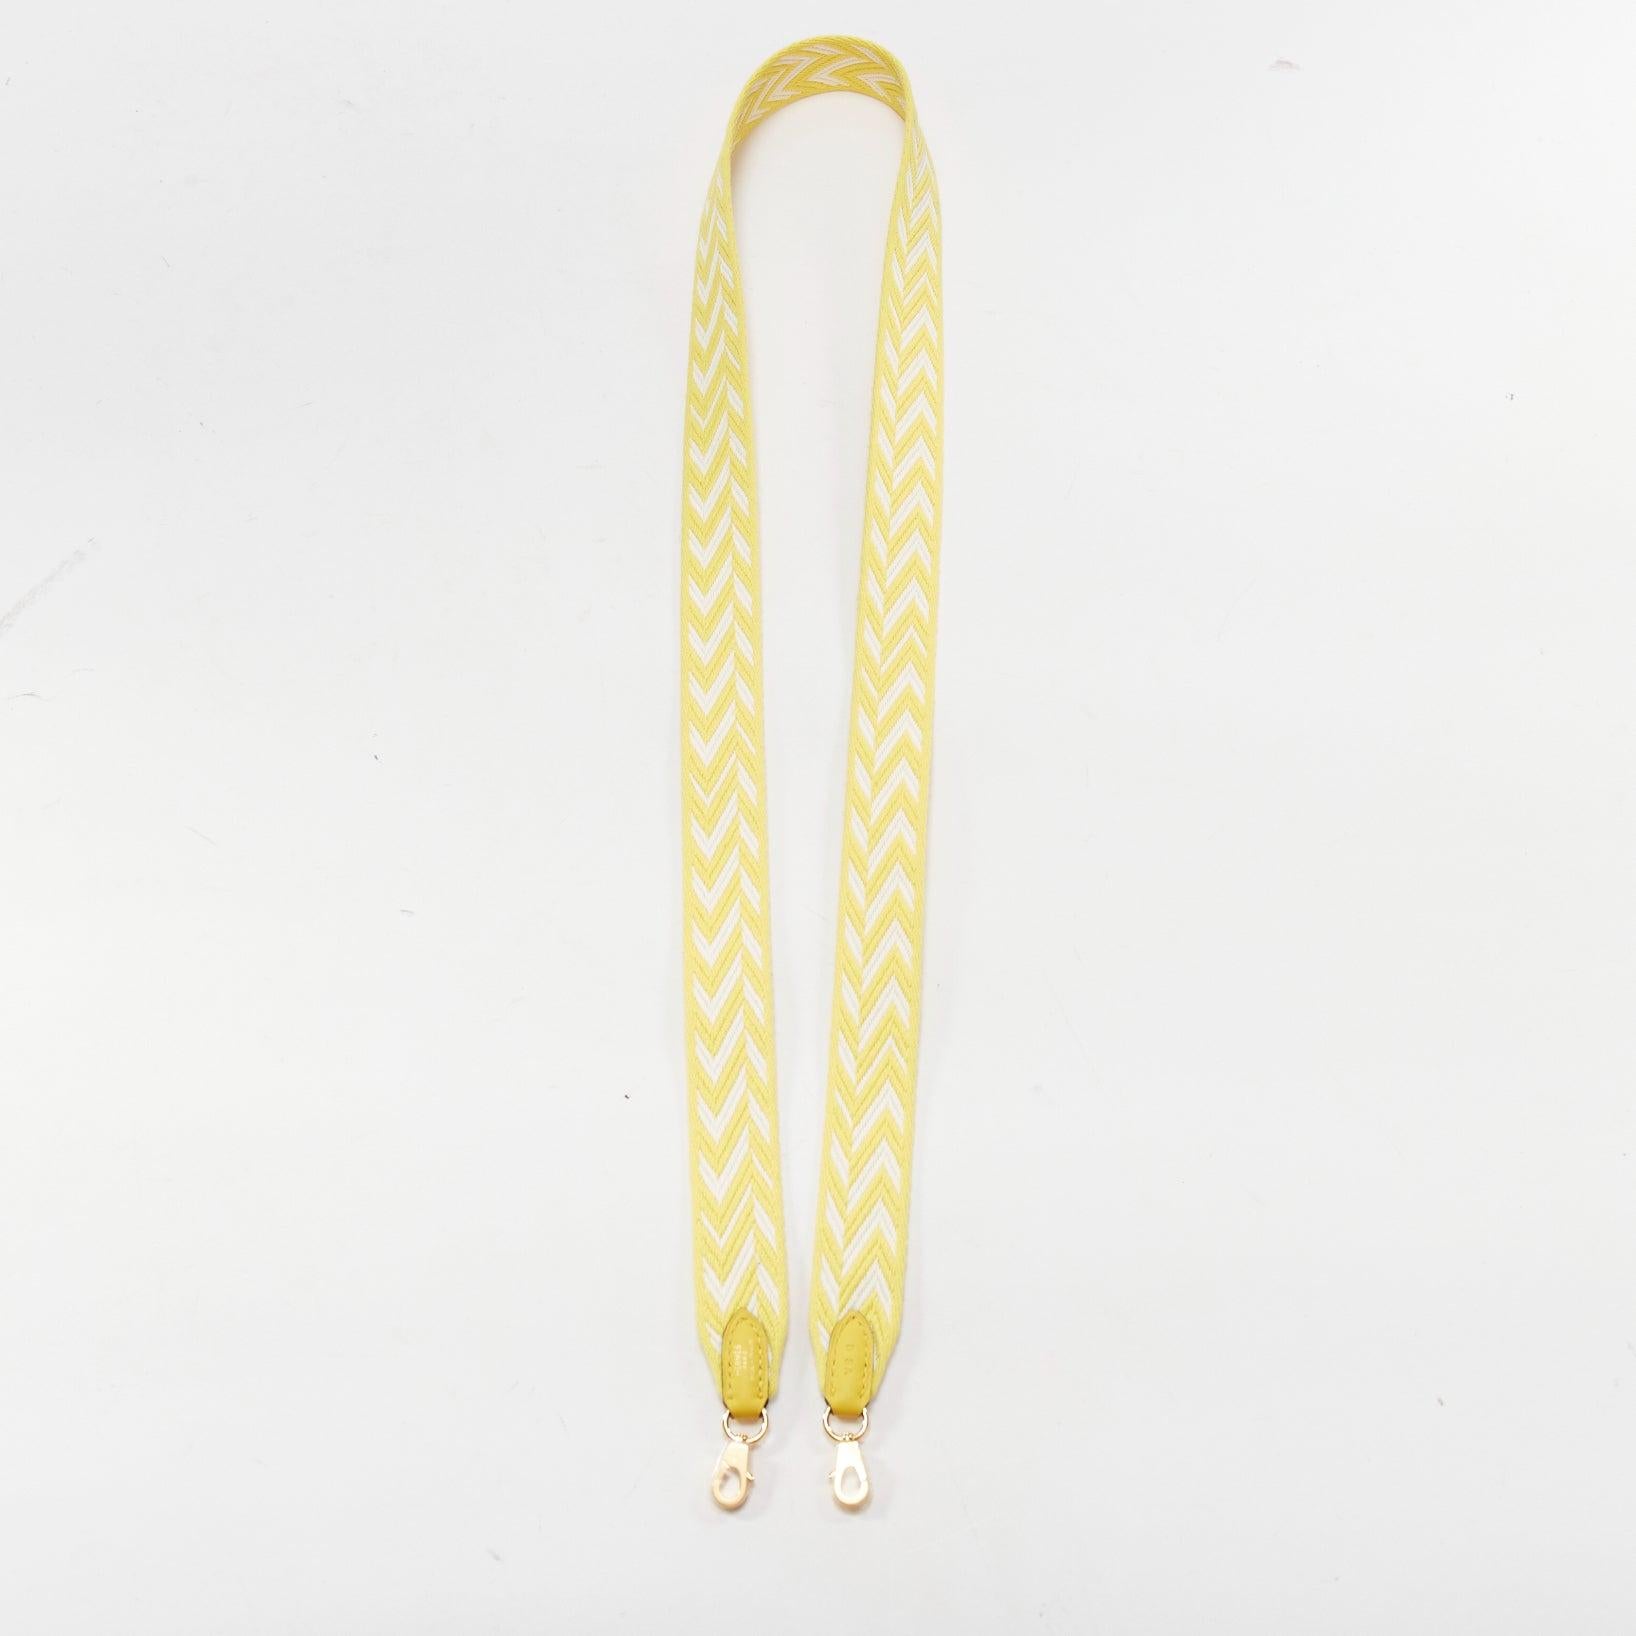 HERMES Sangle Zigzag 25 yellow chevron woven fabric gold hardware bag strap In Excellent Condition For Sale In Hong Kong, NT